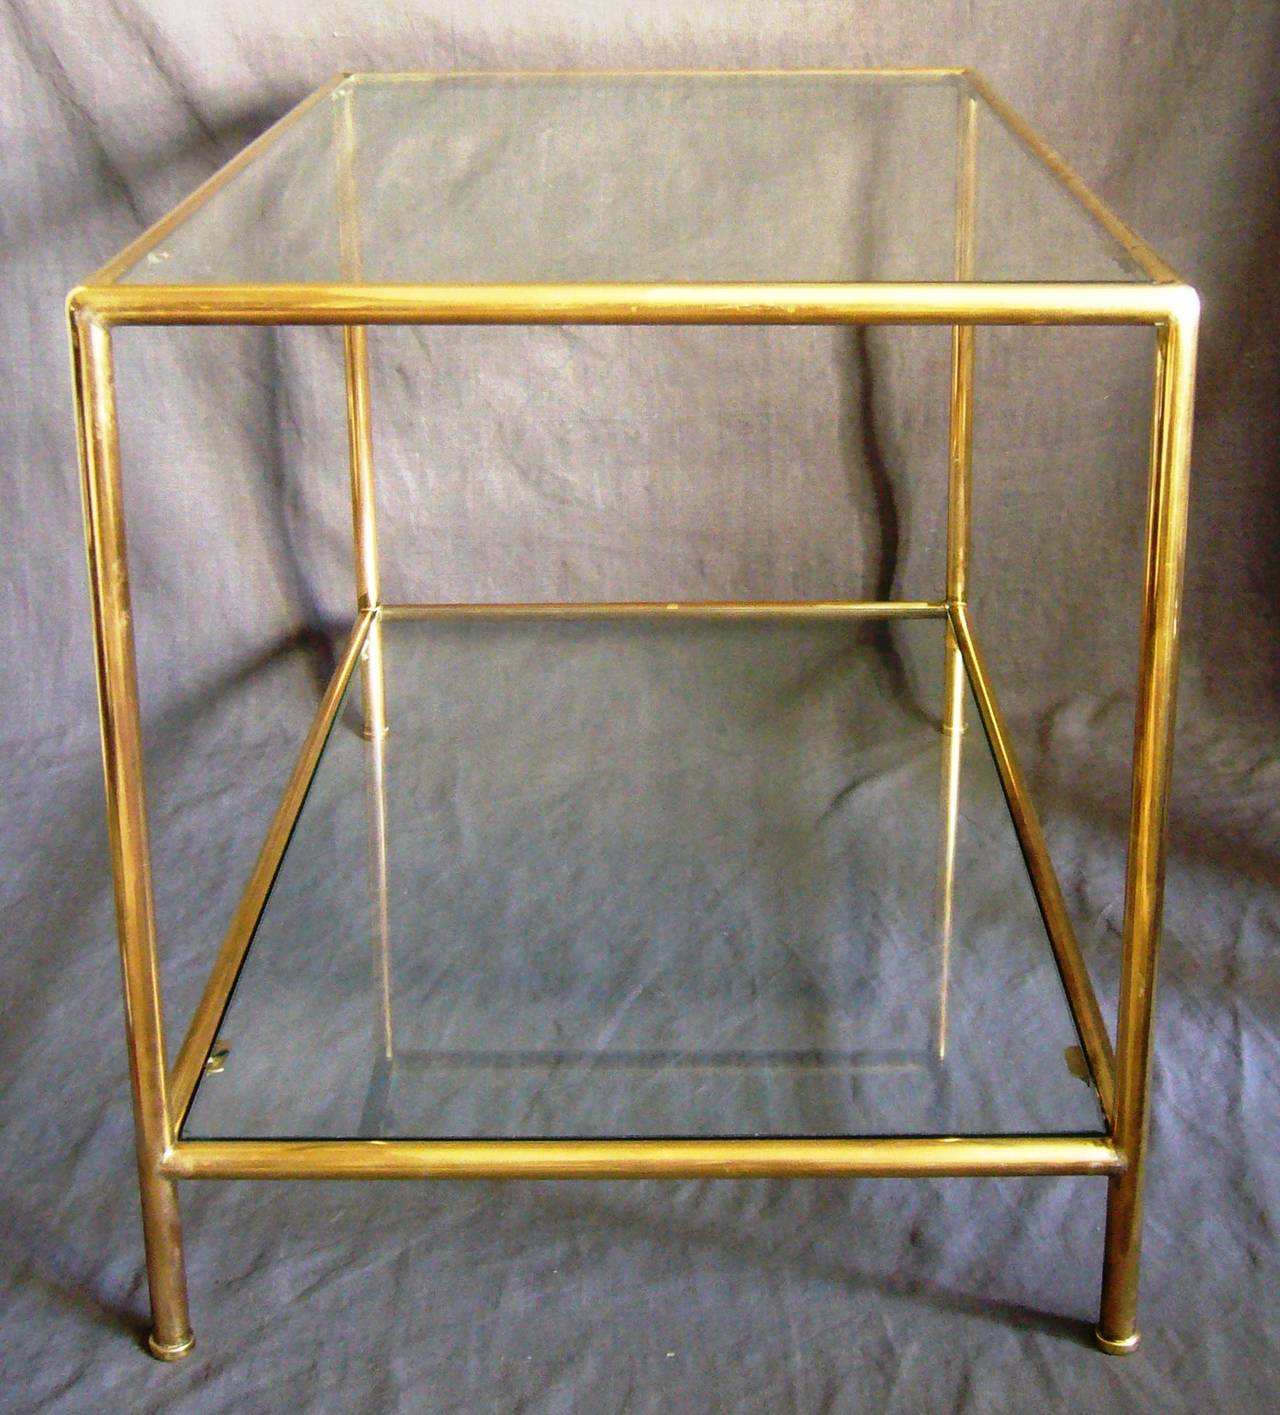 Italian seamless tubular brass coffee table.  Mid-Century Modern seamless tubular brass two-tier coffee table with two glass shelves on elegant capped feet, Italy, circa 1940.
Dimension: 32